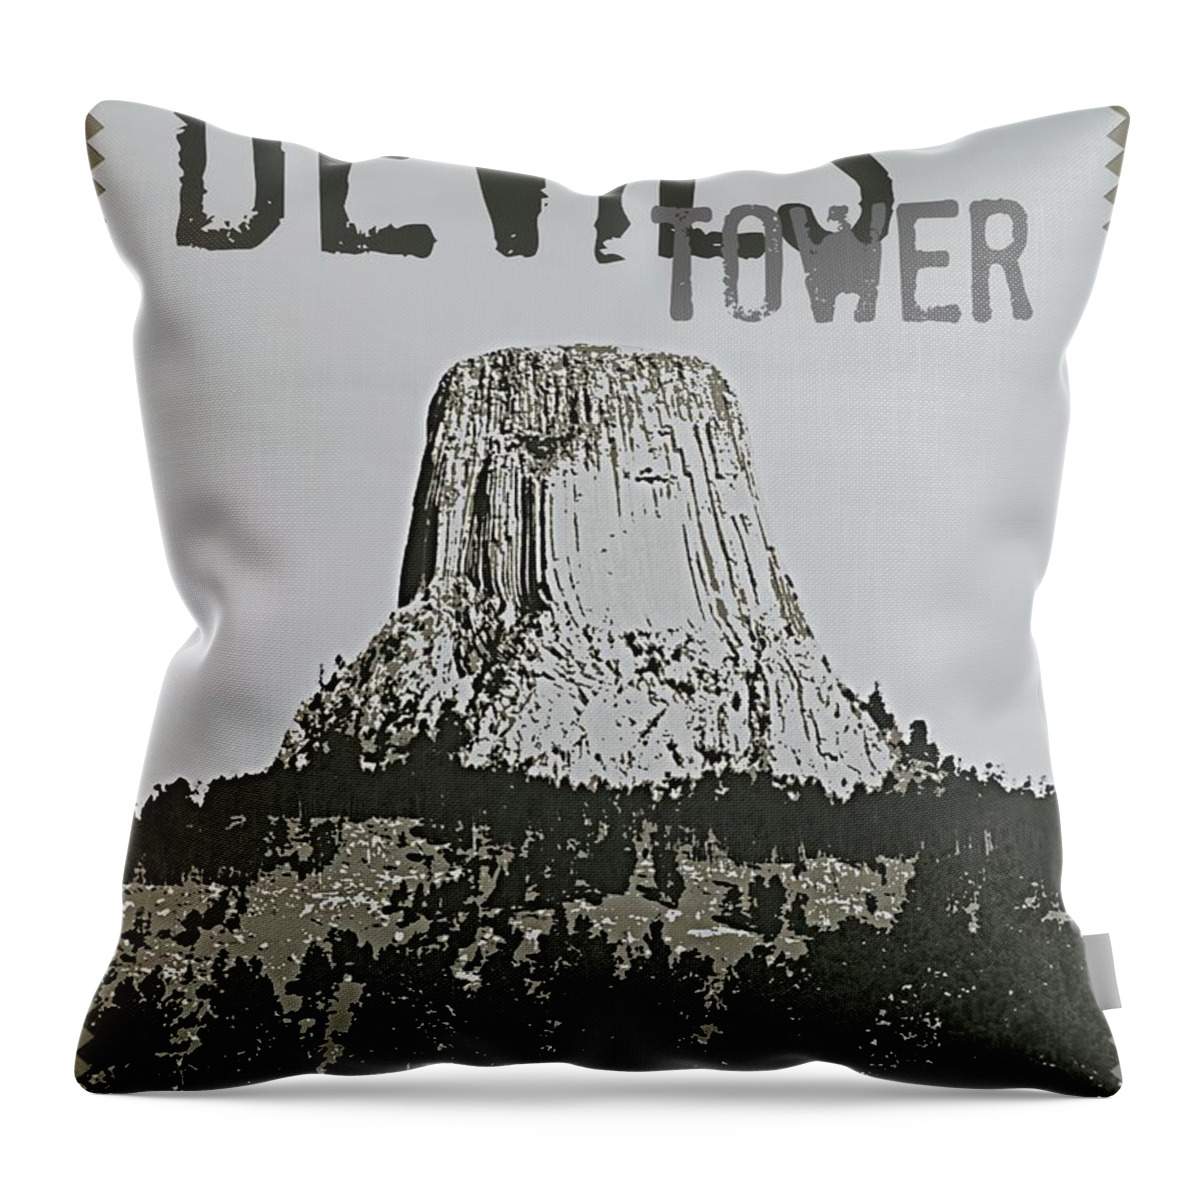 Devilstower Throw Pillow featuring the digital art Devils Tower Stamp by Troy Stapek